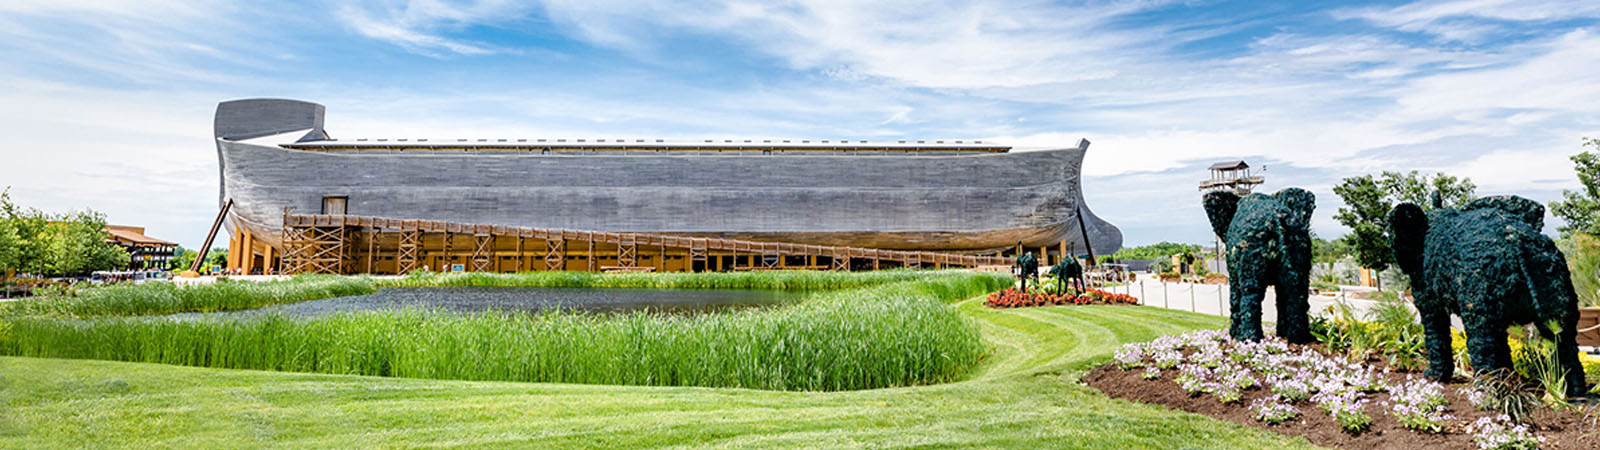 The Creation Museum and The Ark Encounter